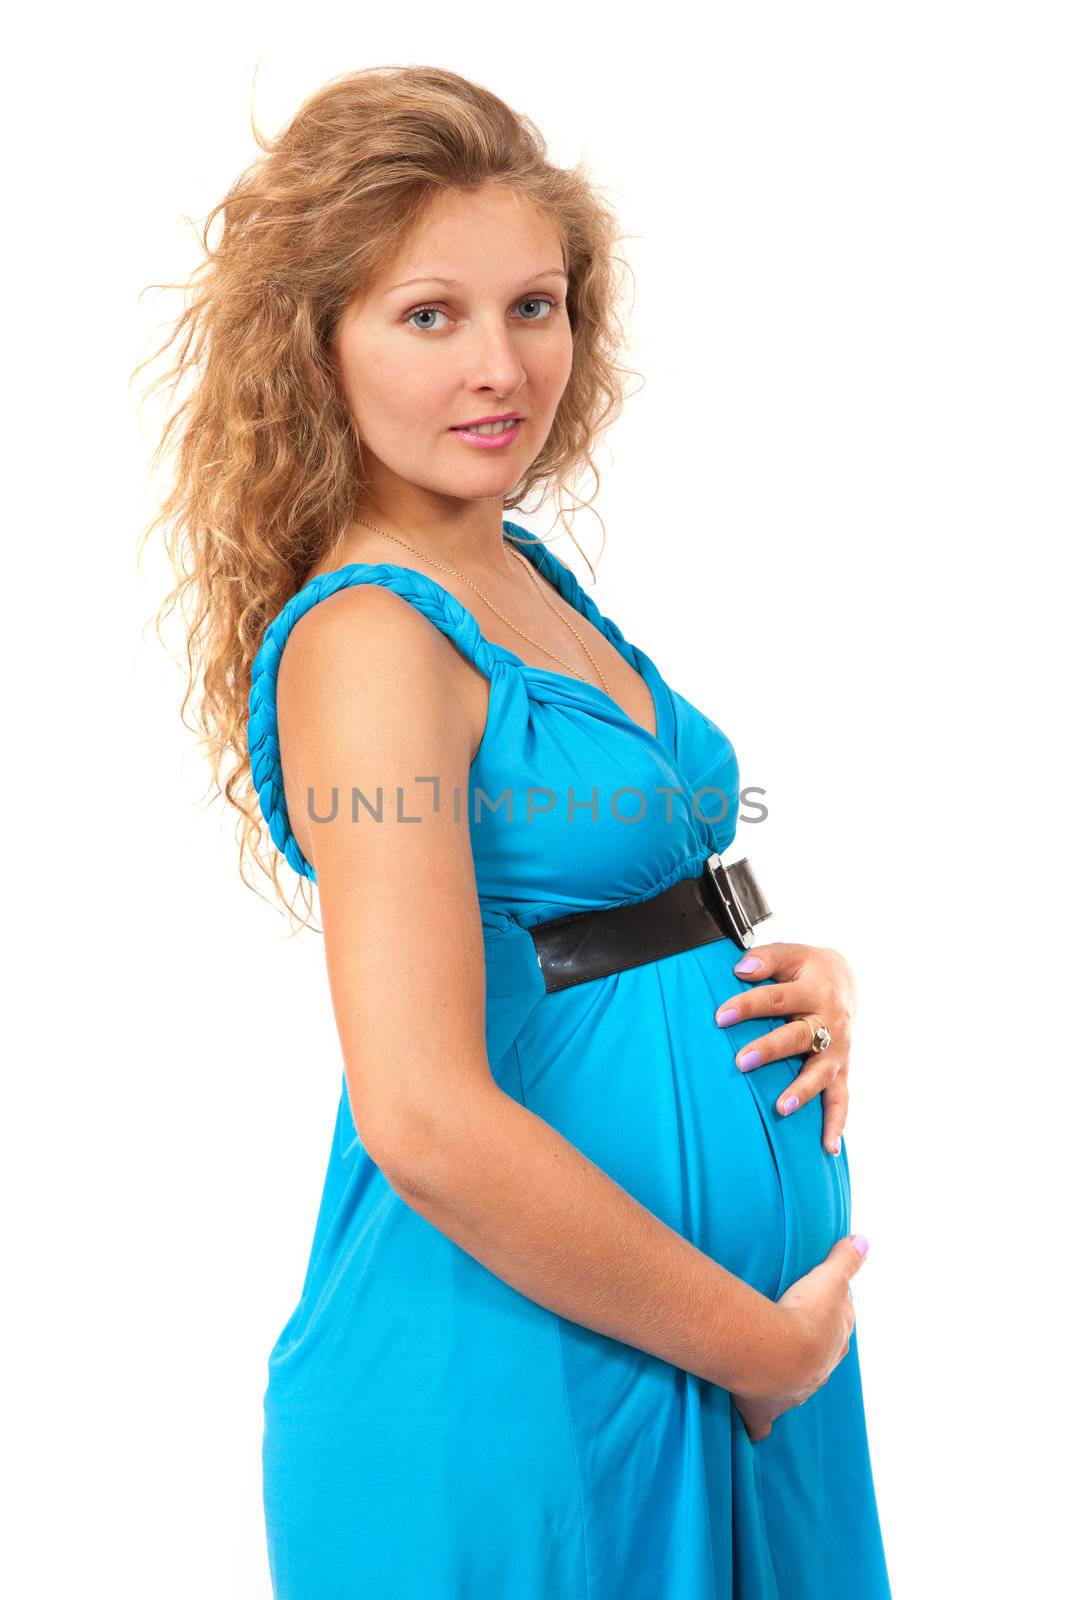 Pregnant woman is caressing her belly over white background